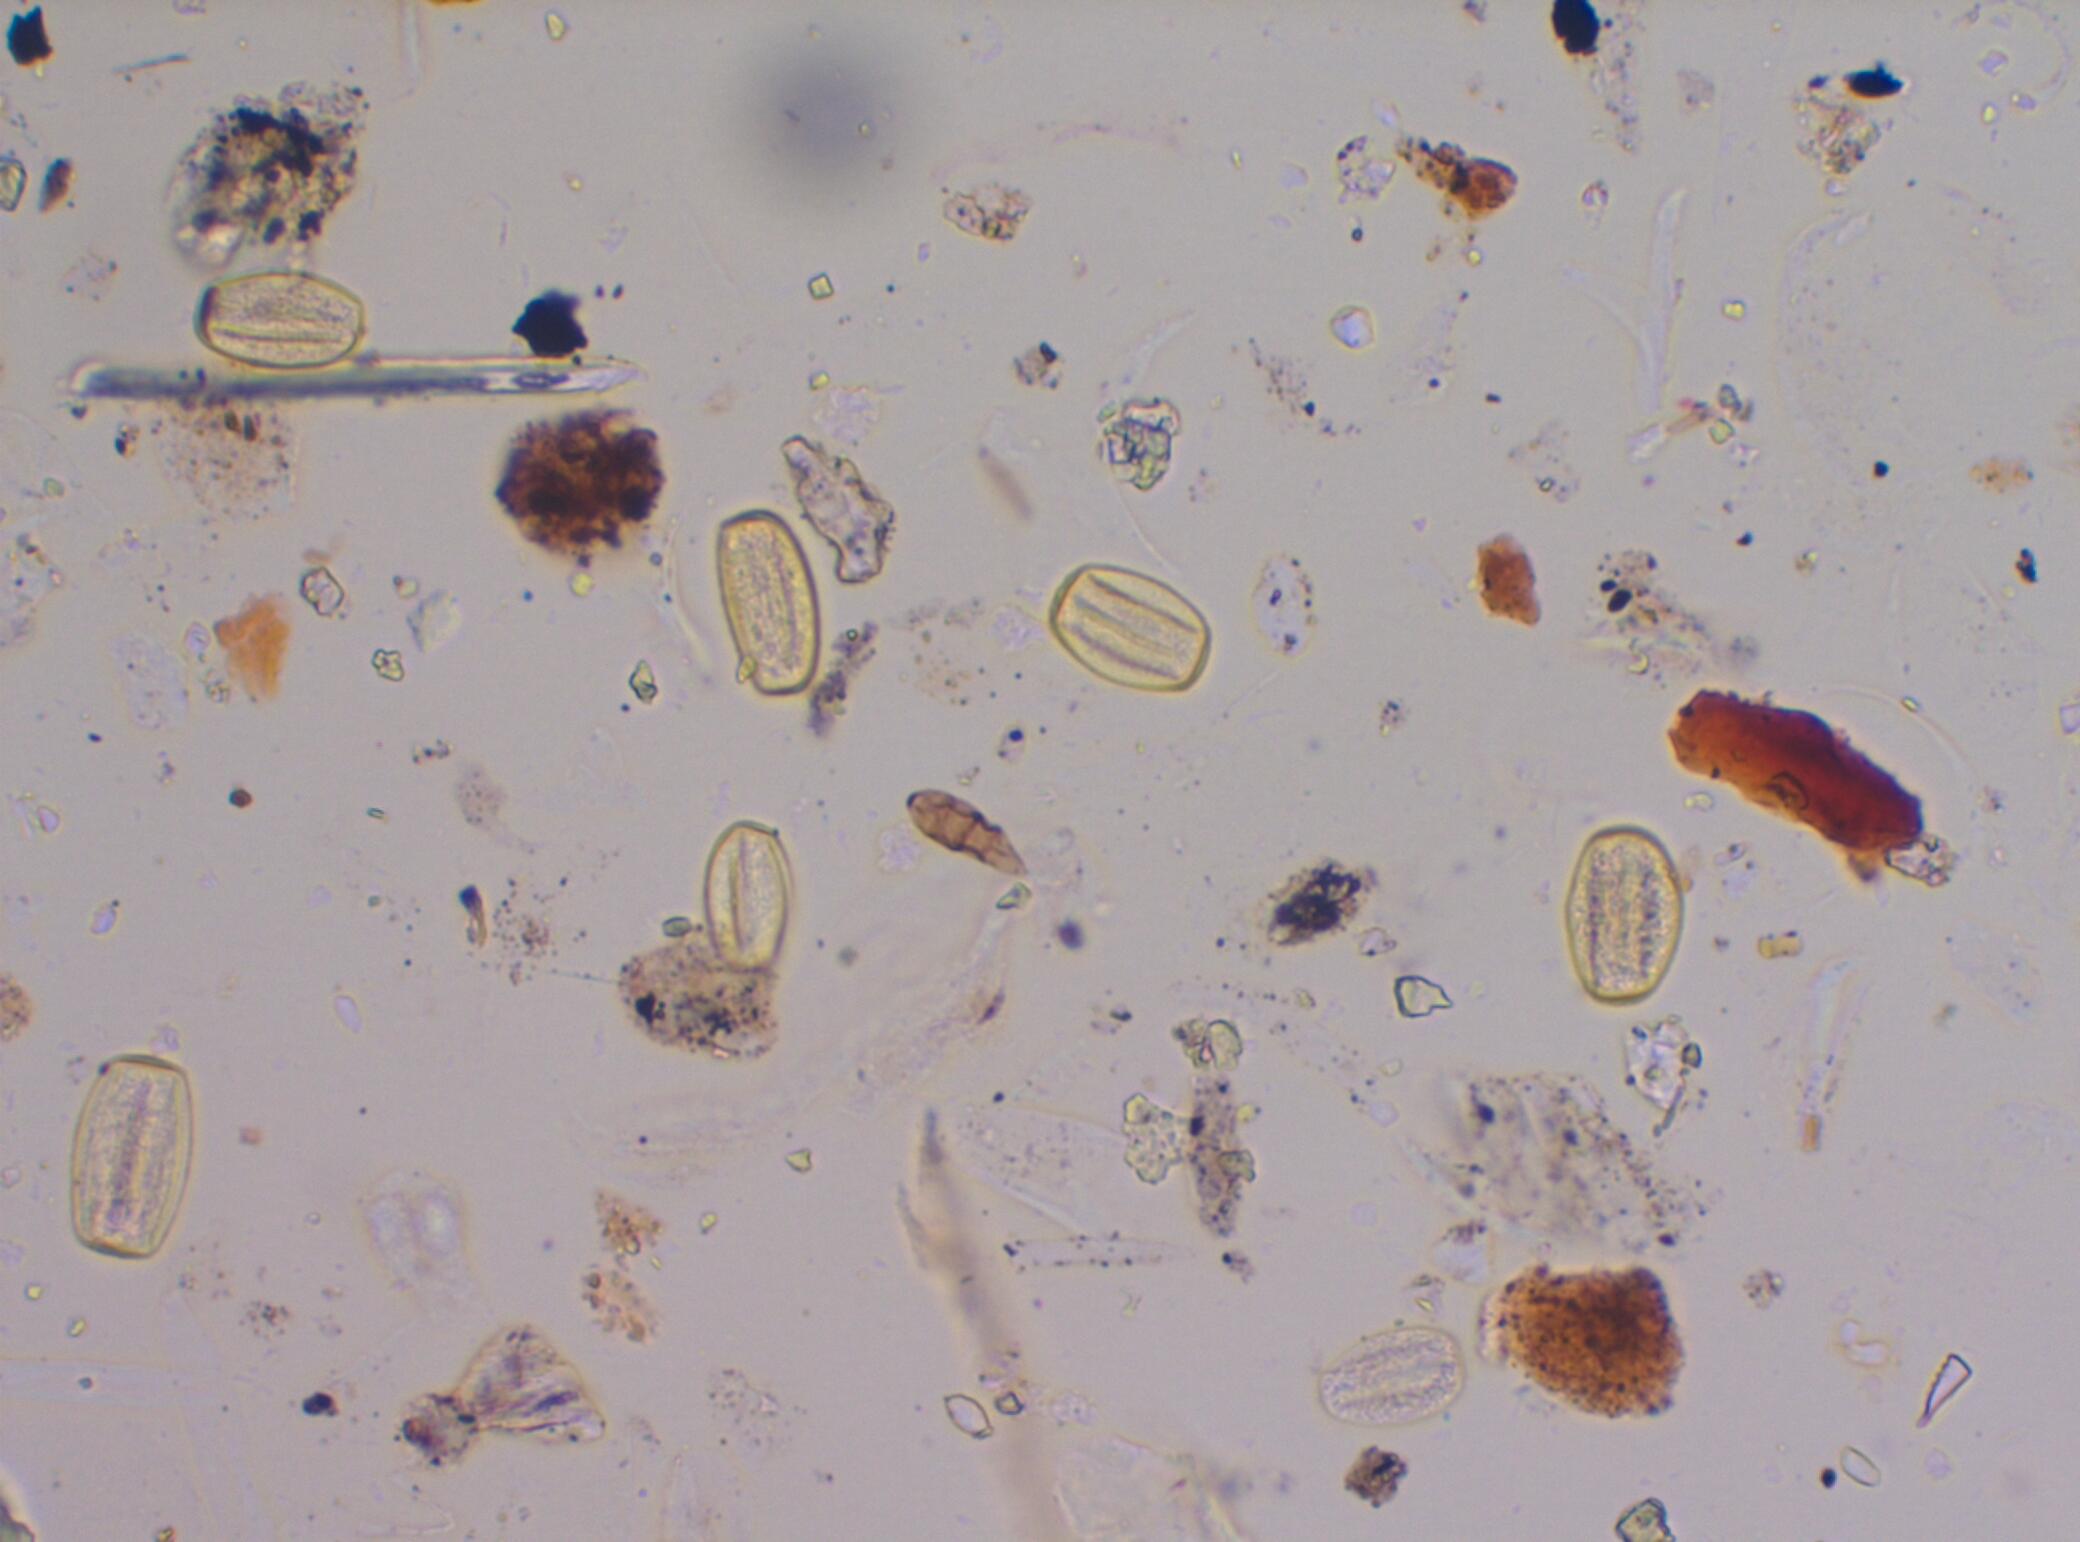 Environmental Forensics - Pollen Imaged by PLM